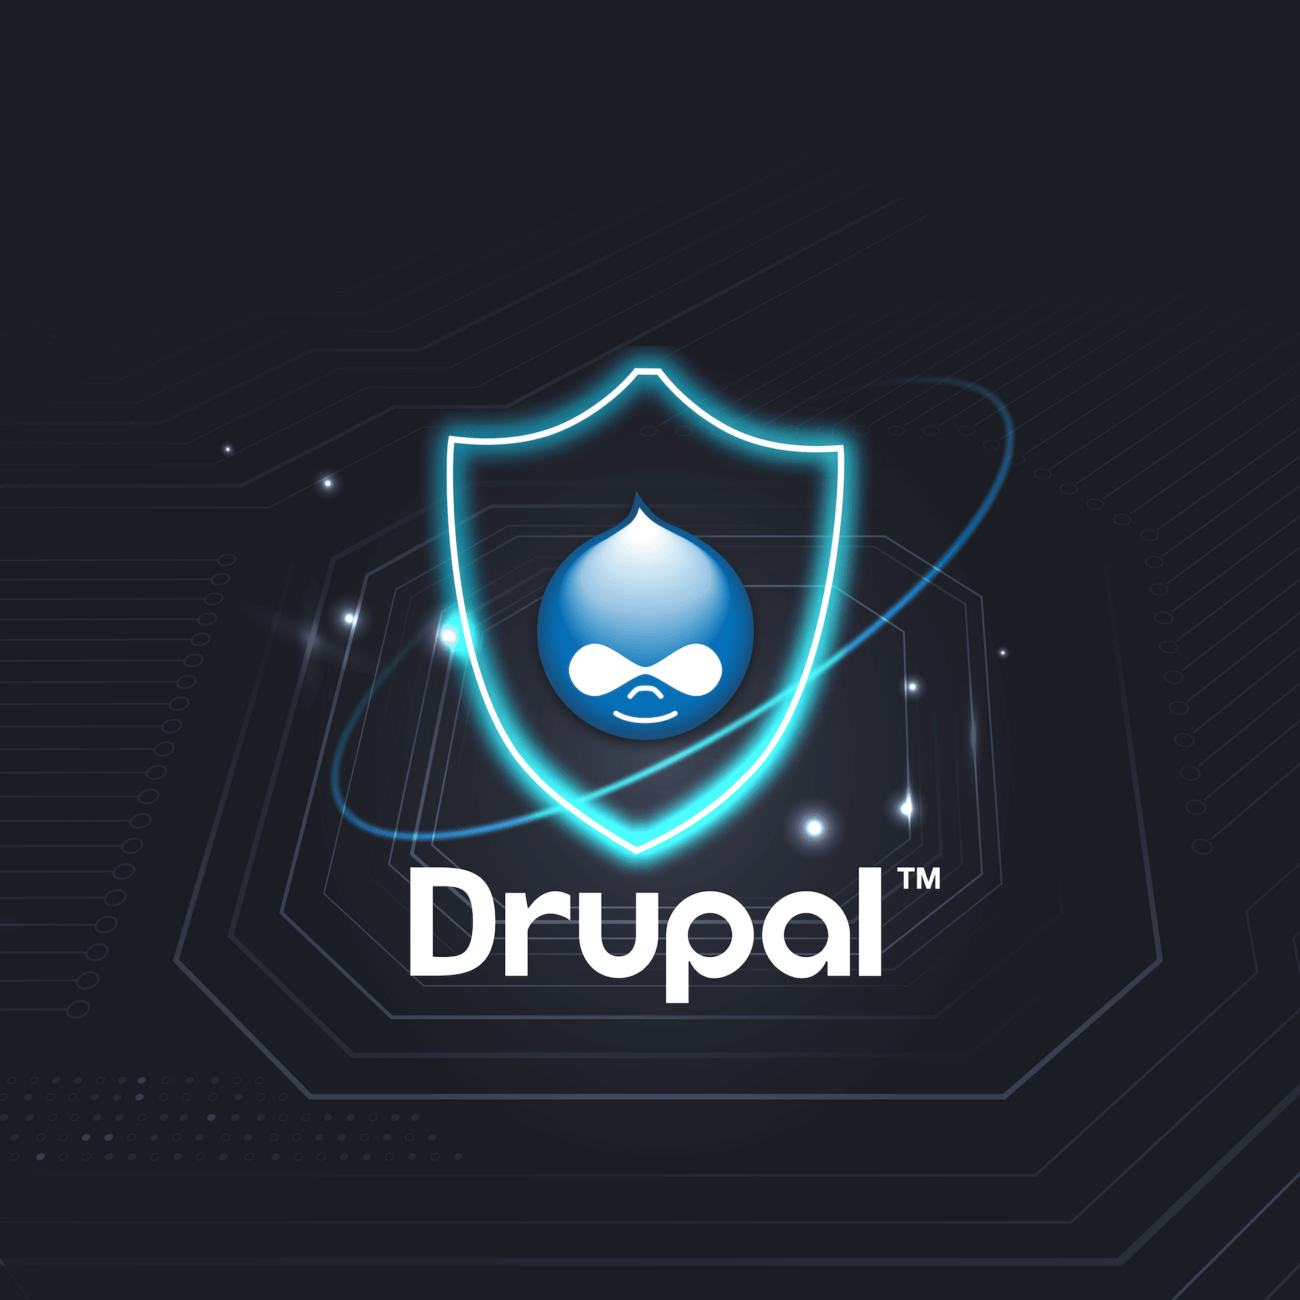 Drupal logo on background that looks like a circuit board